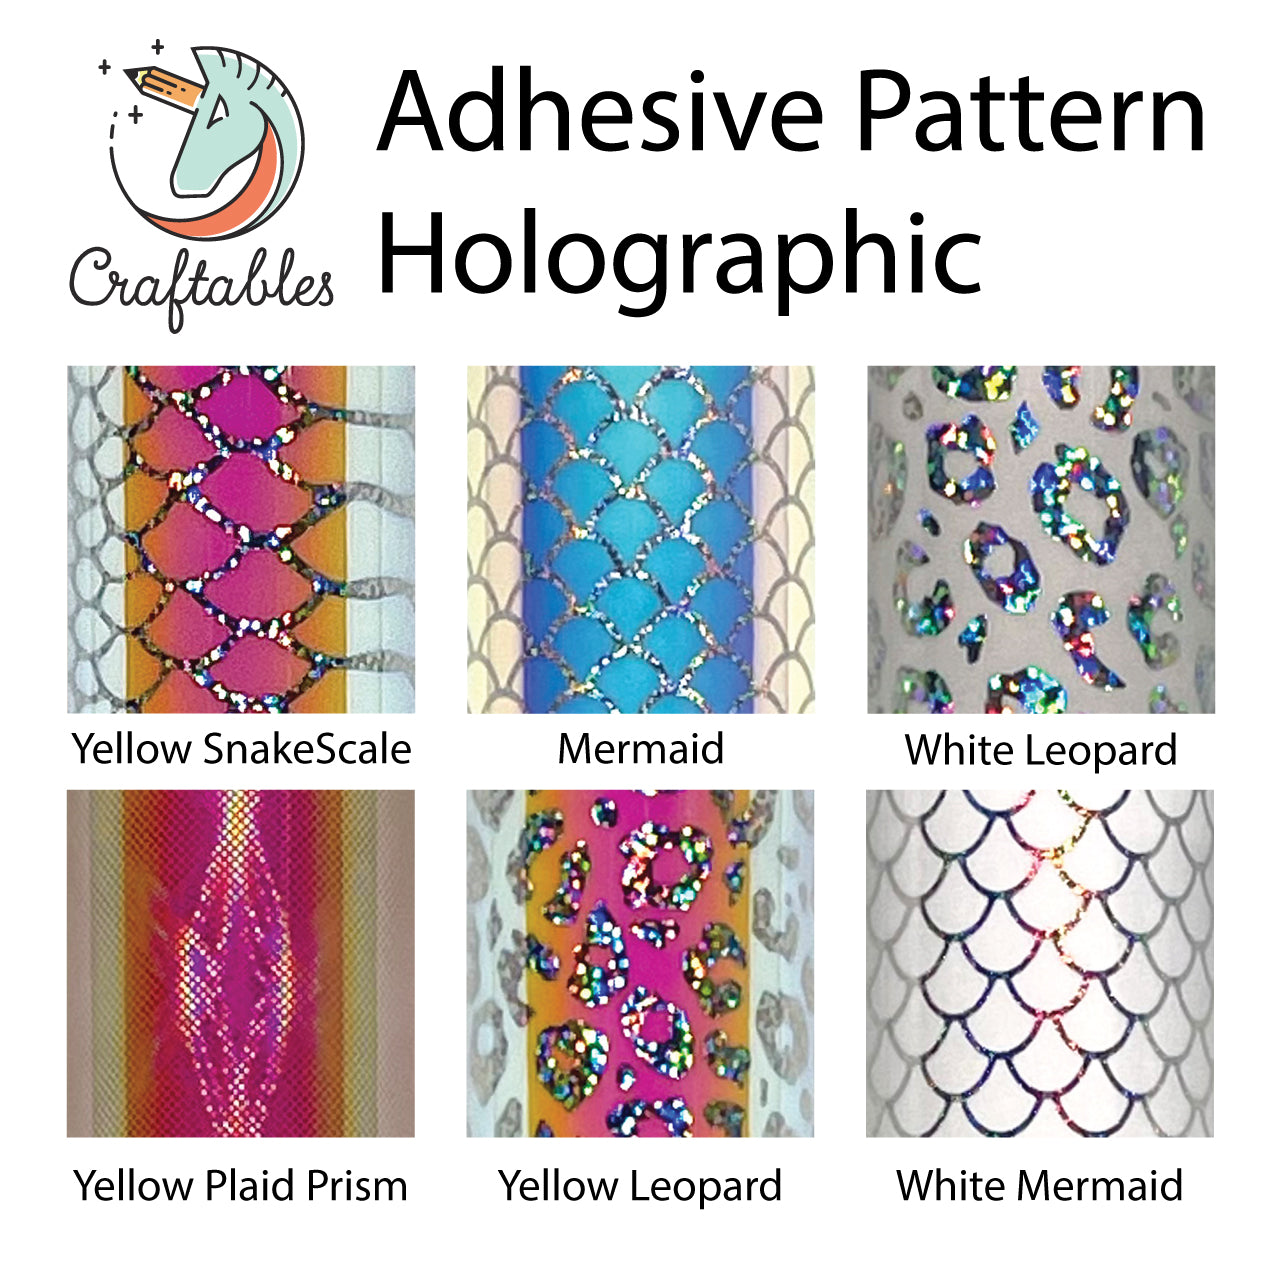 White Leopard Pattern Holographic Adhesive Vinyl Sheets By Craftables